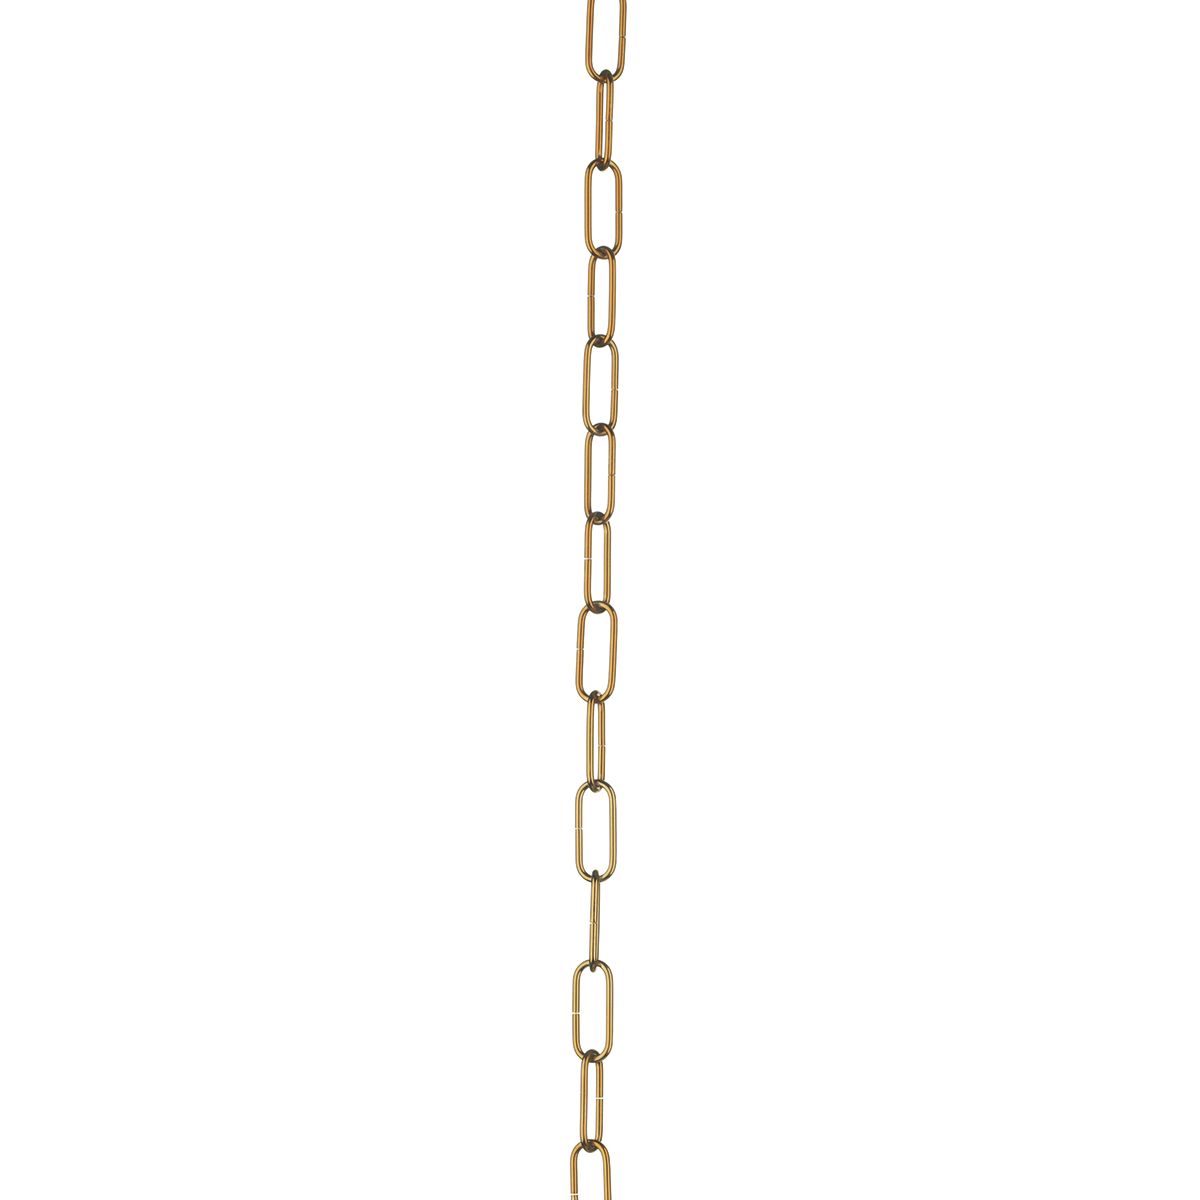 David Hunt Lighting Spare Chain For Station Pendant 0.5m 6 Colours